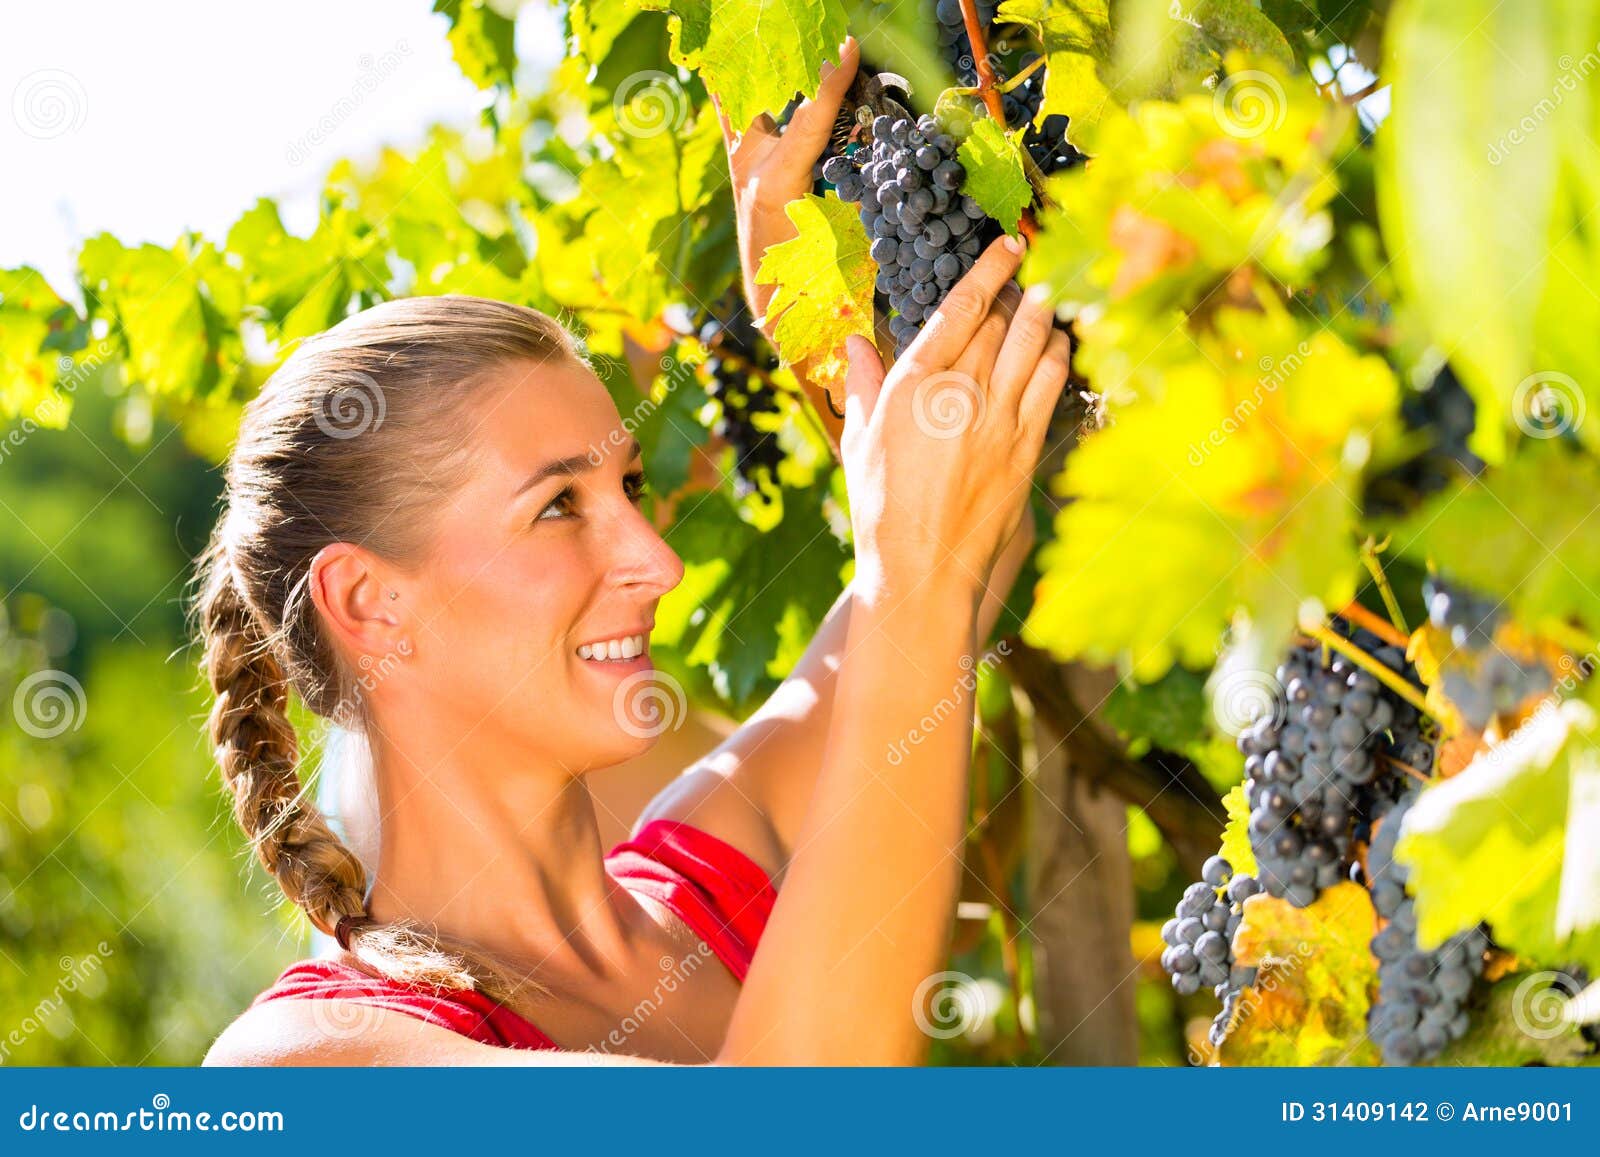 woman picking grapes with shear at harvest time